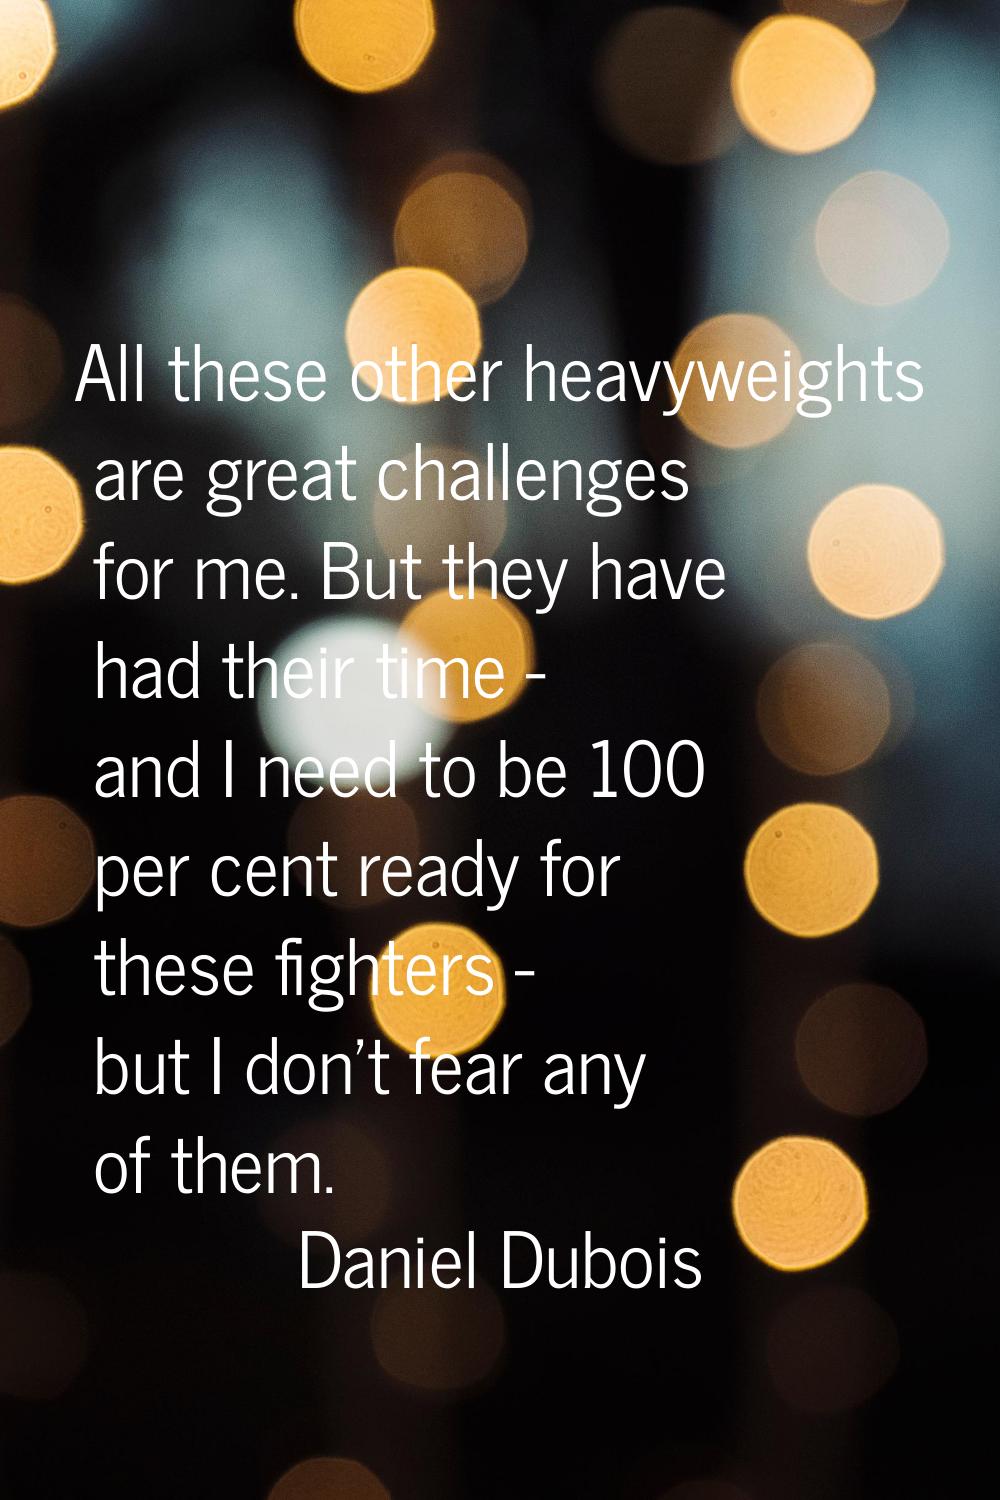 All these other heavyweights are great challenges for me. But they have had their time - and I need